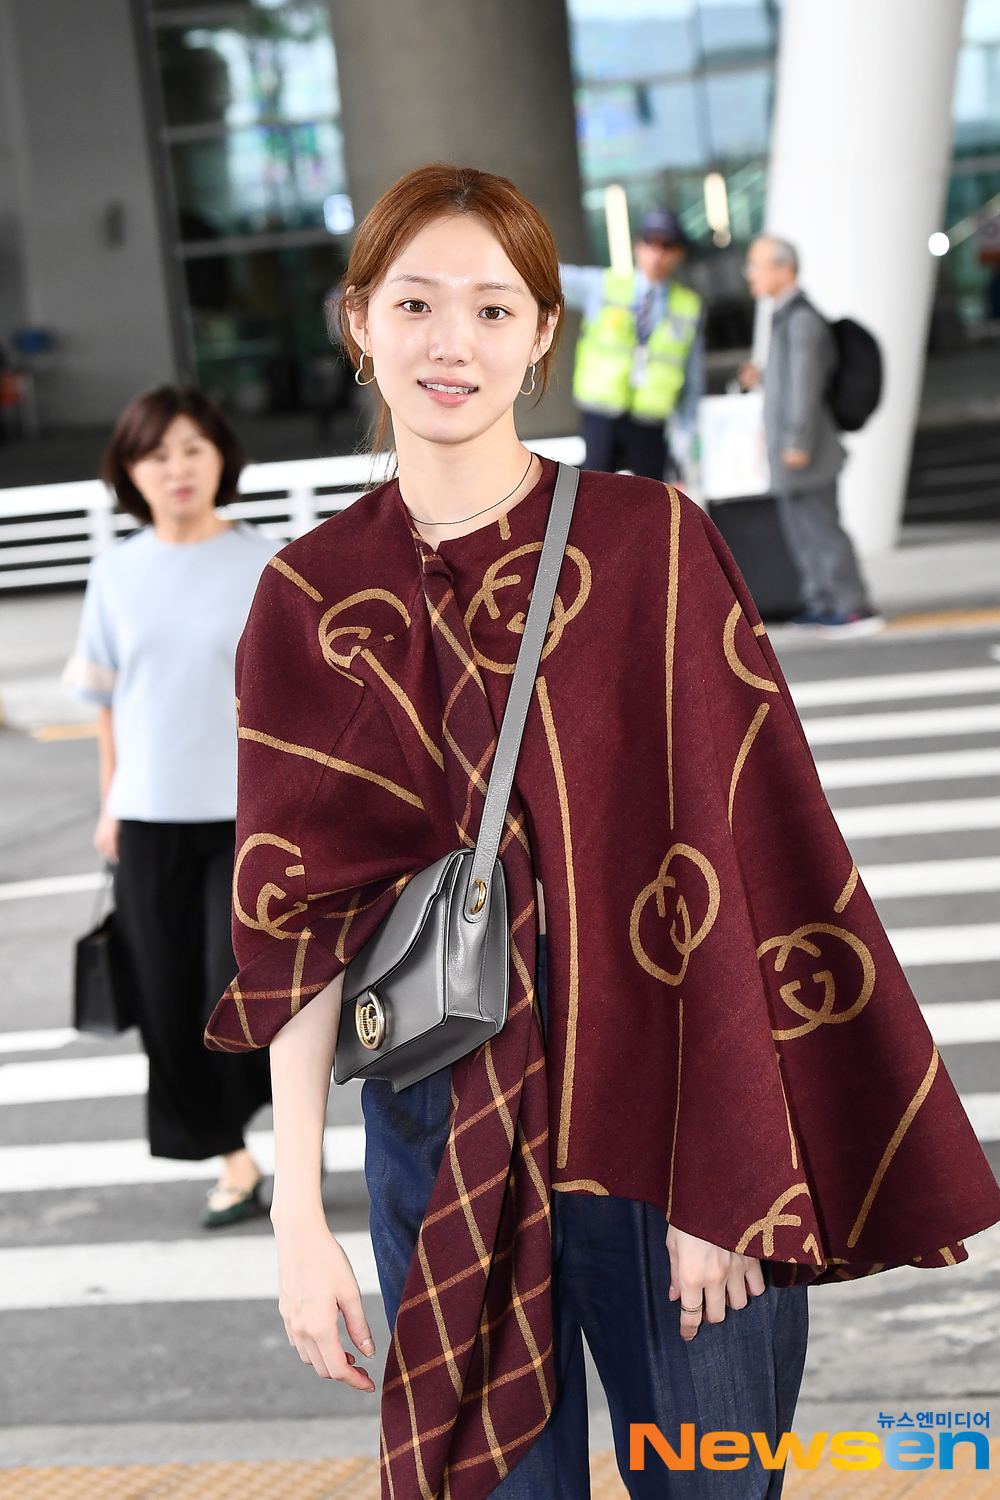 Actor Lee Sung-kyung (LEE SUNG KYUNG) arrives from Milan, Italy, after completing an overseas schedule through the Incheon International Airport in Unseo-dong, Jung-gu, Incheon, on the afternoon of September 26.exponential earthquake